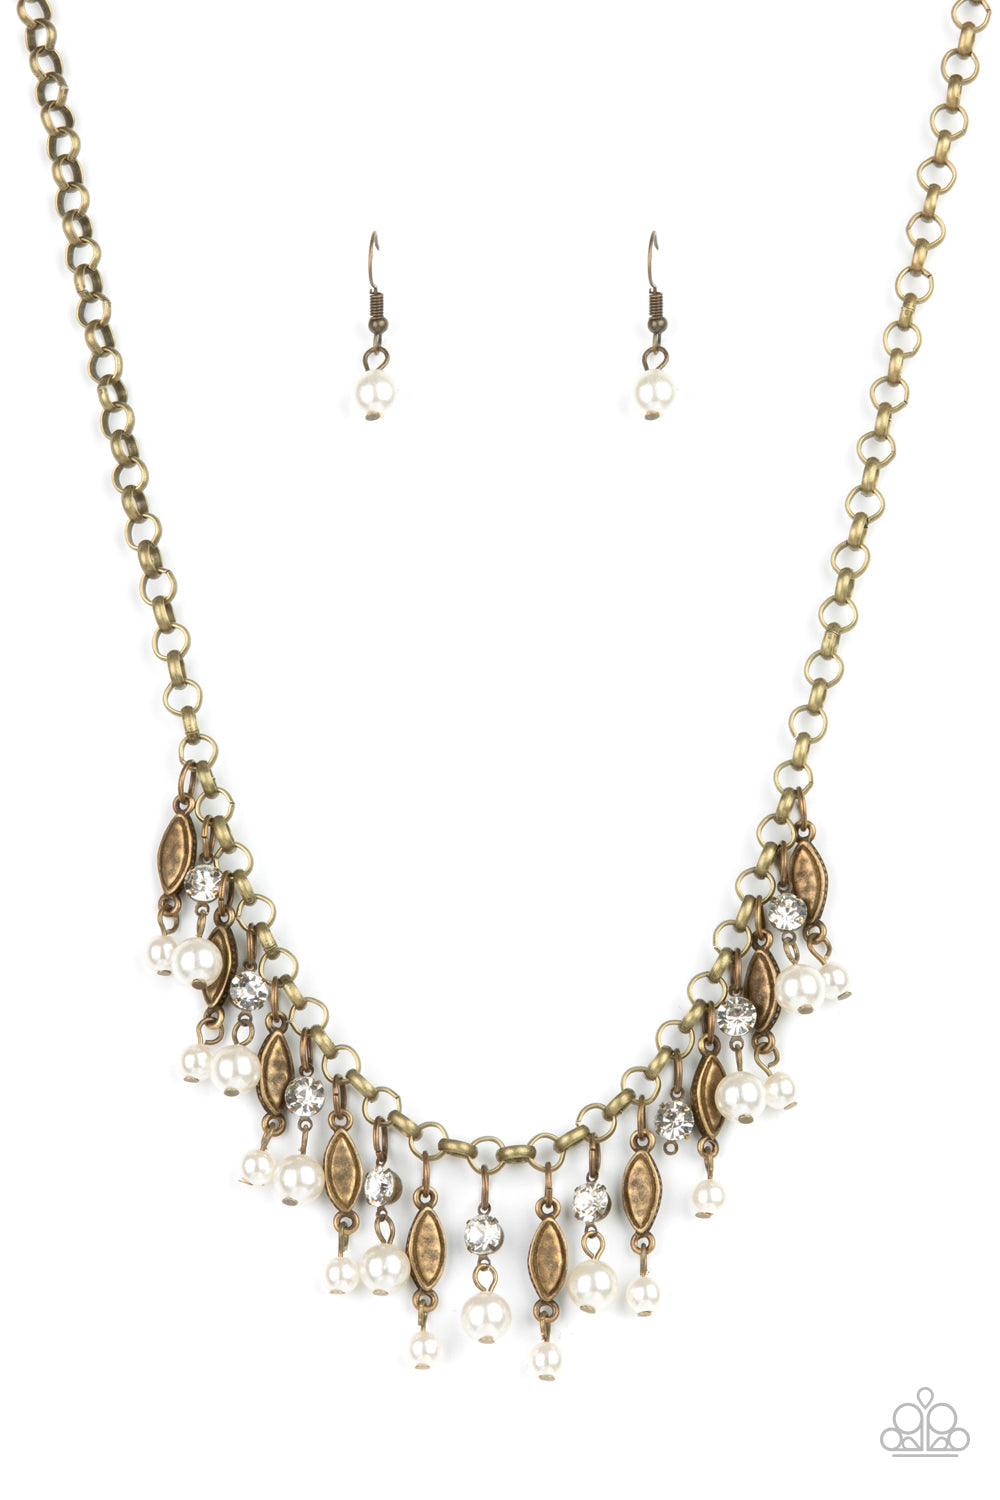 Cosmopolitan Couture - Brass - White Pearls Necklace - Paparazzi Accessories - Bubbly white pearls swing from the bottoms of glittery white rhinestones and studded brass frames that alternate along a chunky brass chain creating a glamorously grunge fringe below the collar.